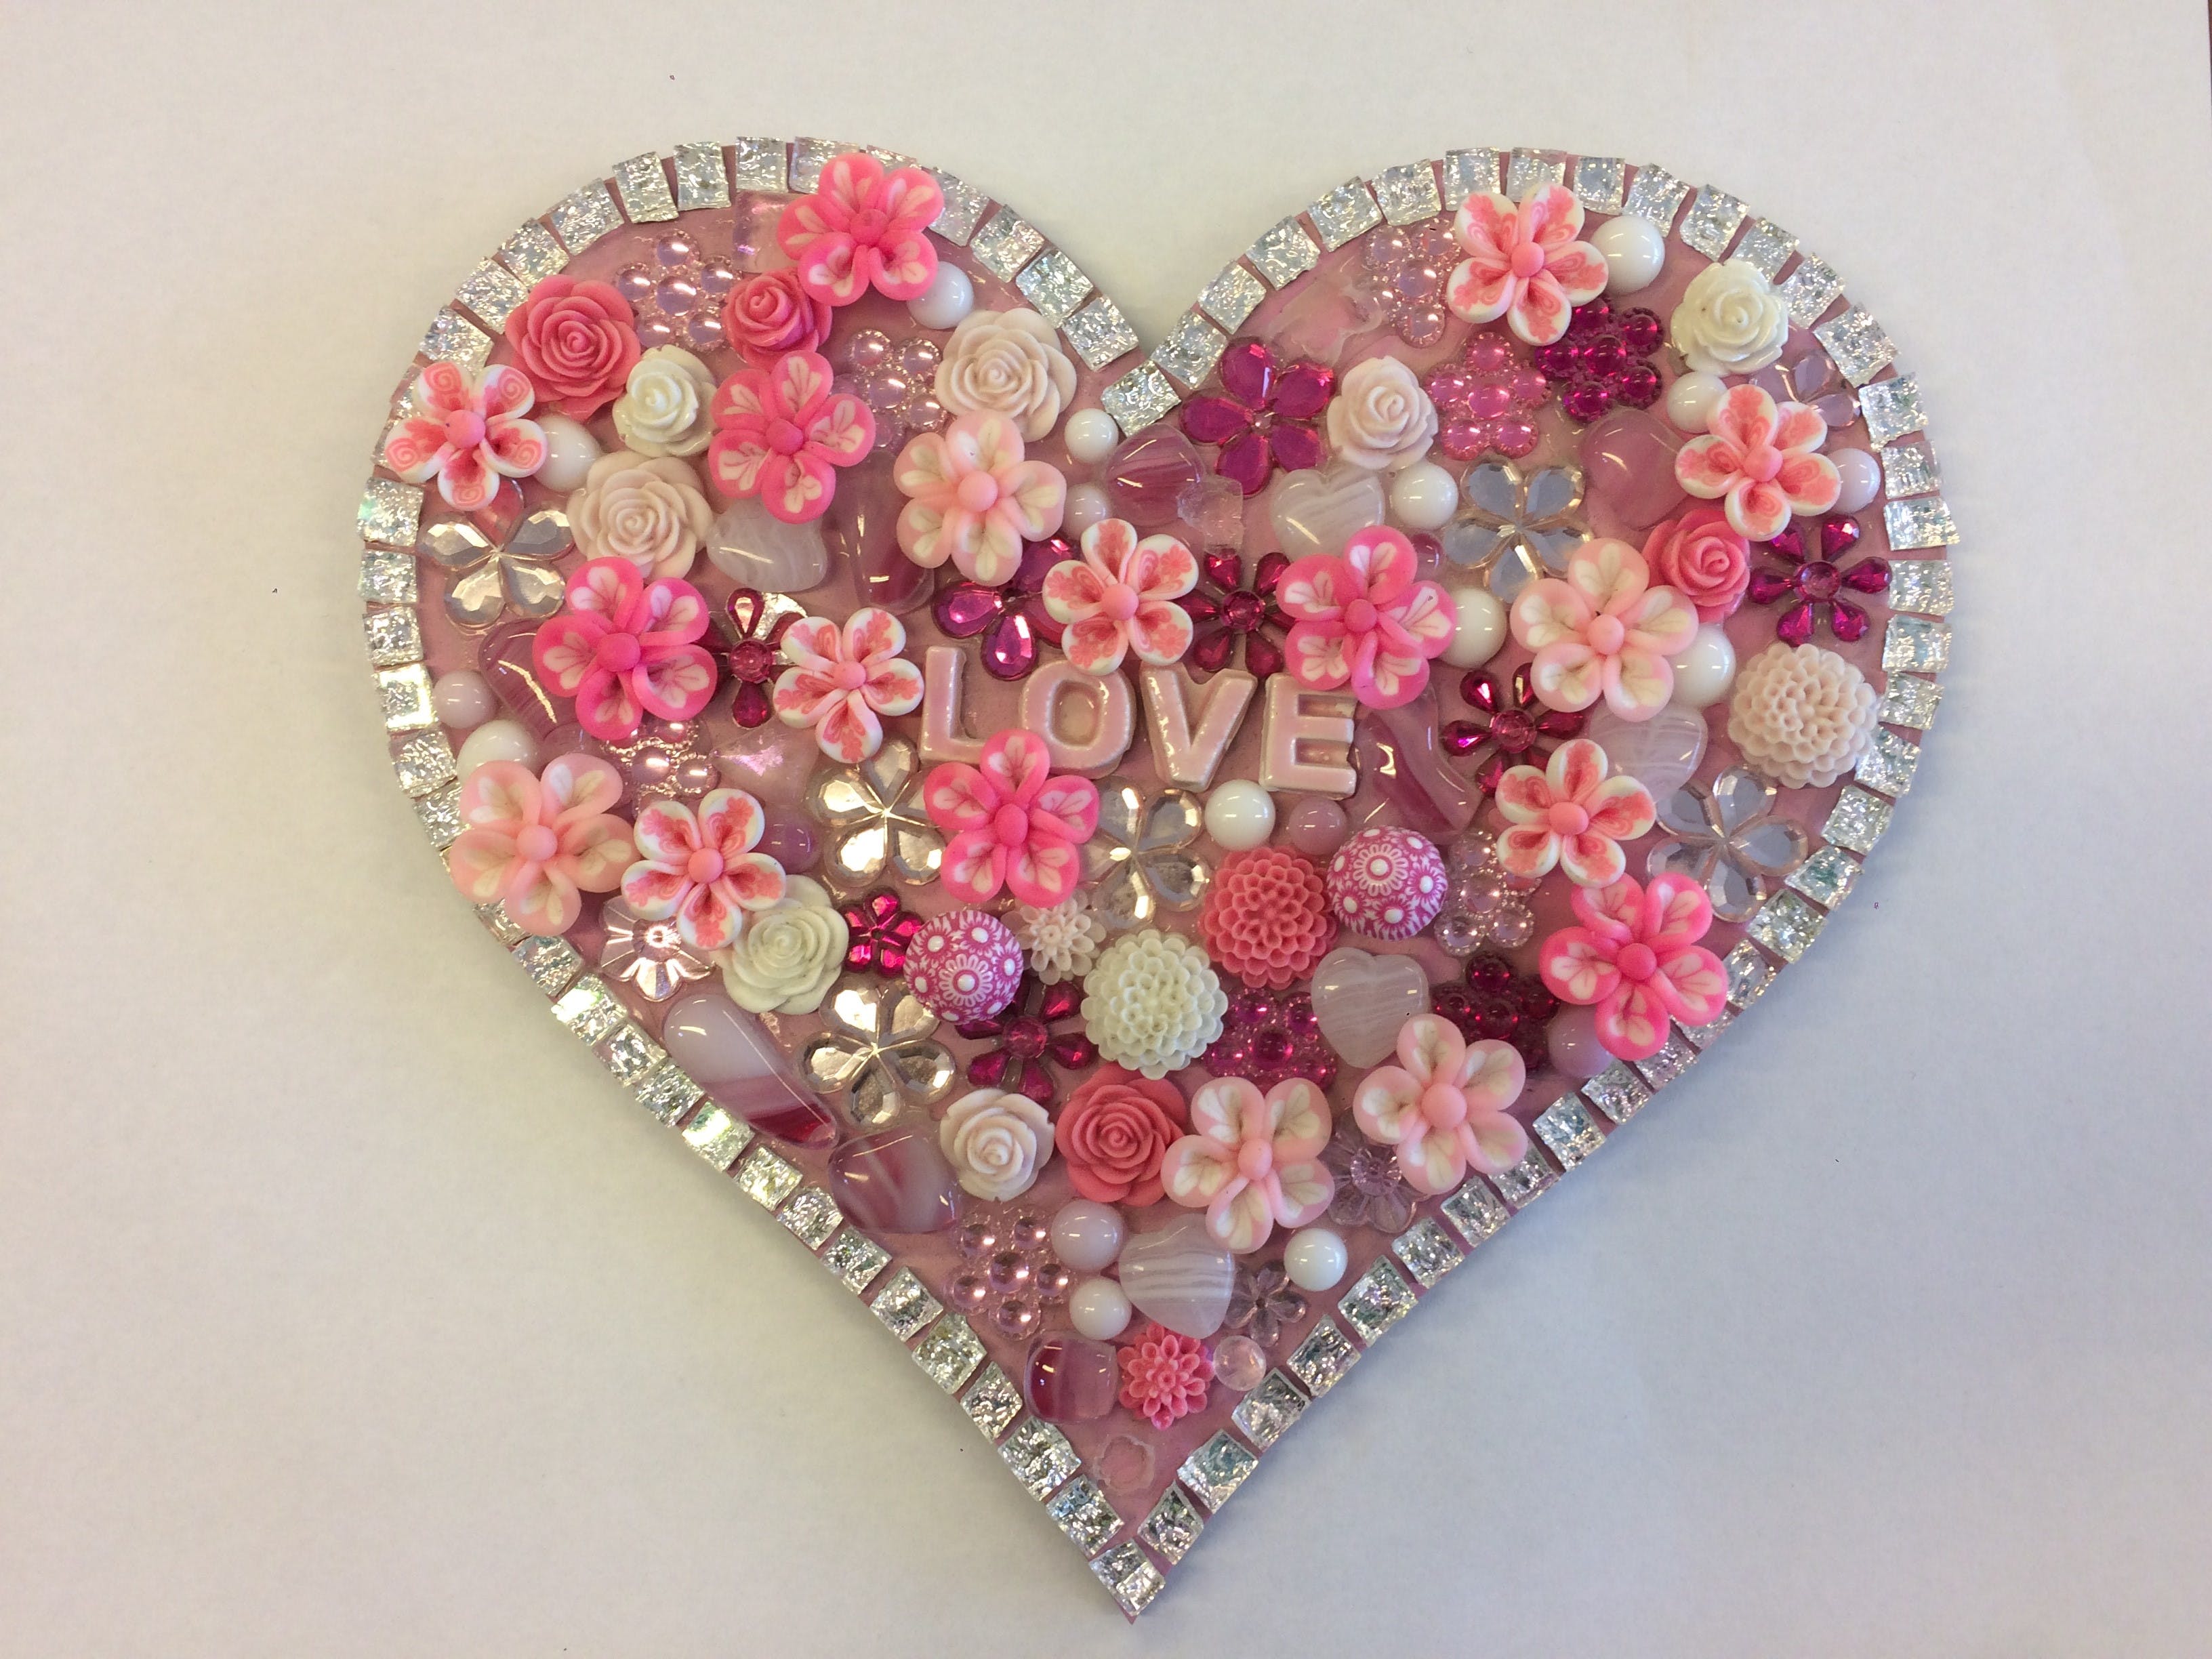 Flowers and Bling Mosaic Class for Kids - WA Accommodation